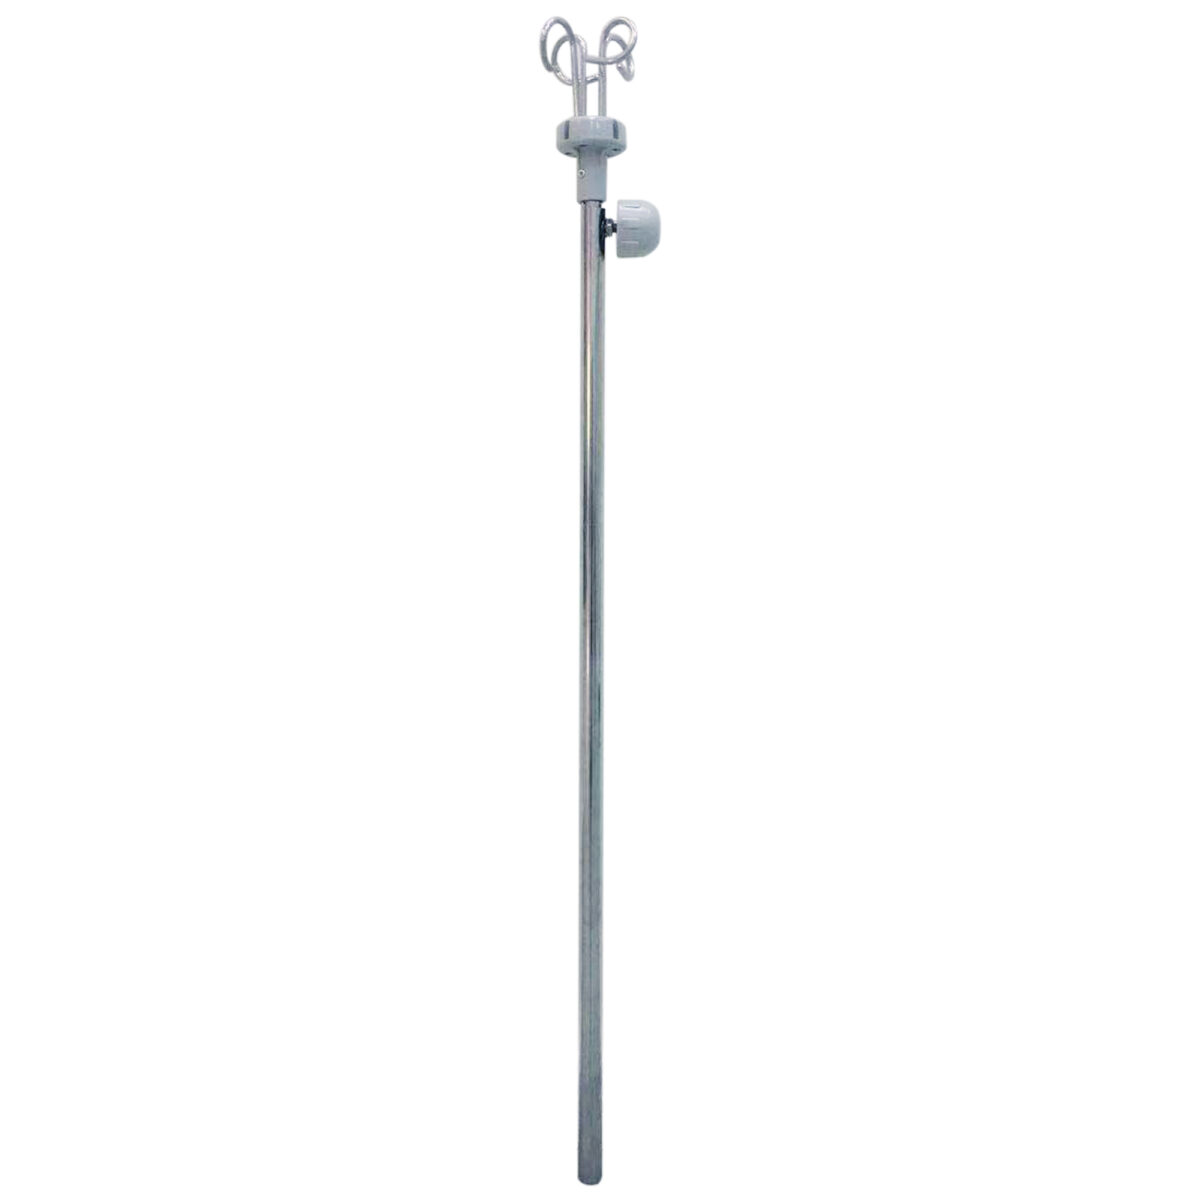 S01 IV Pole, Stainless Steel IV Pole with 0.8 inch Diameter for ...